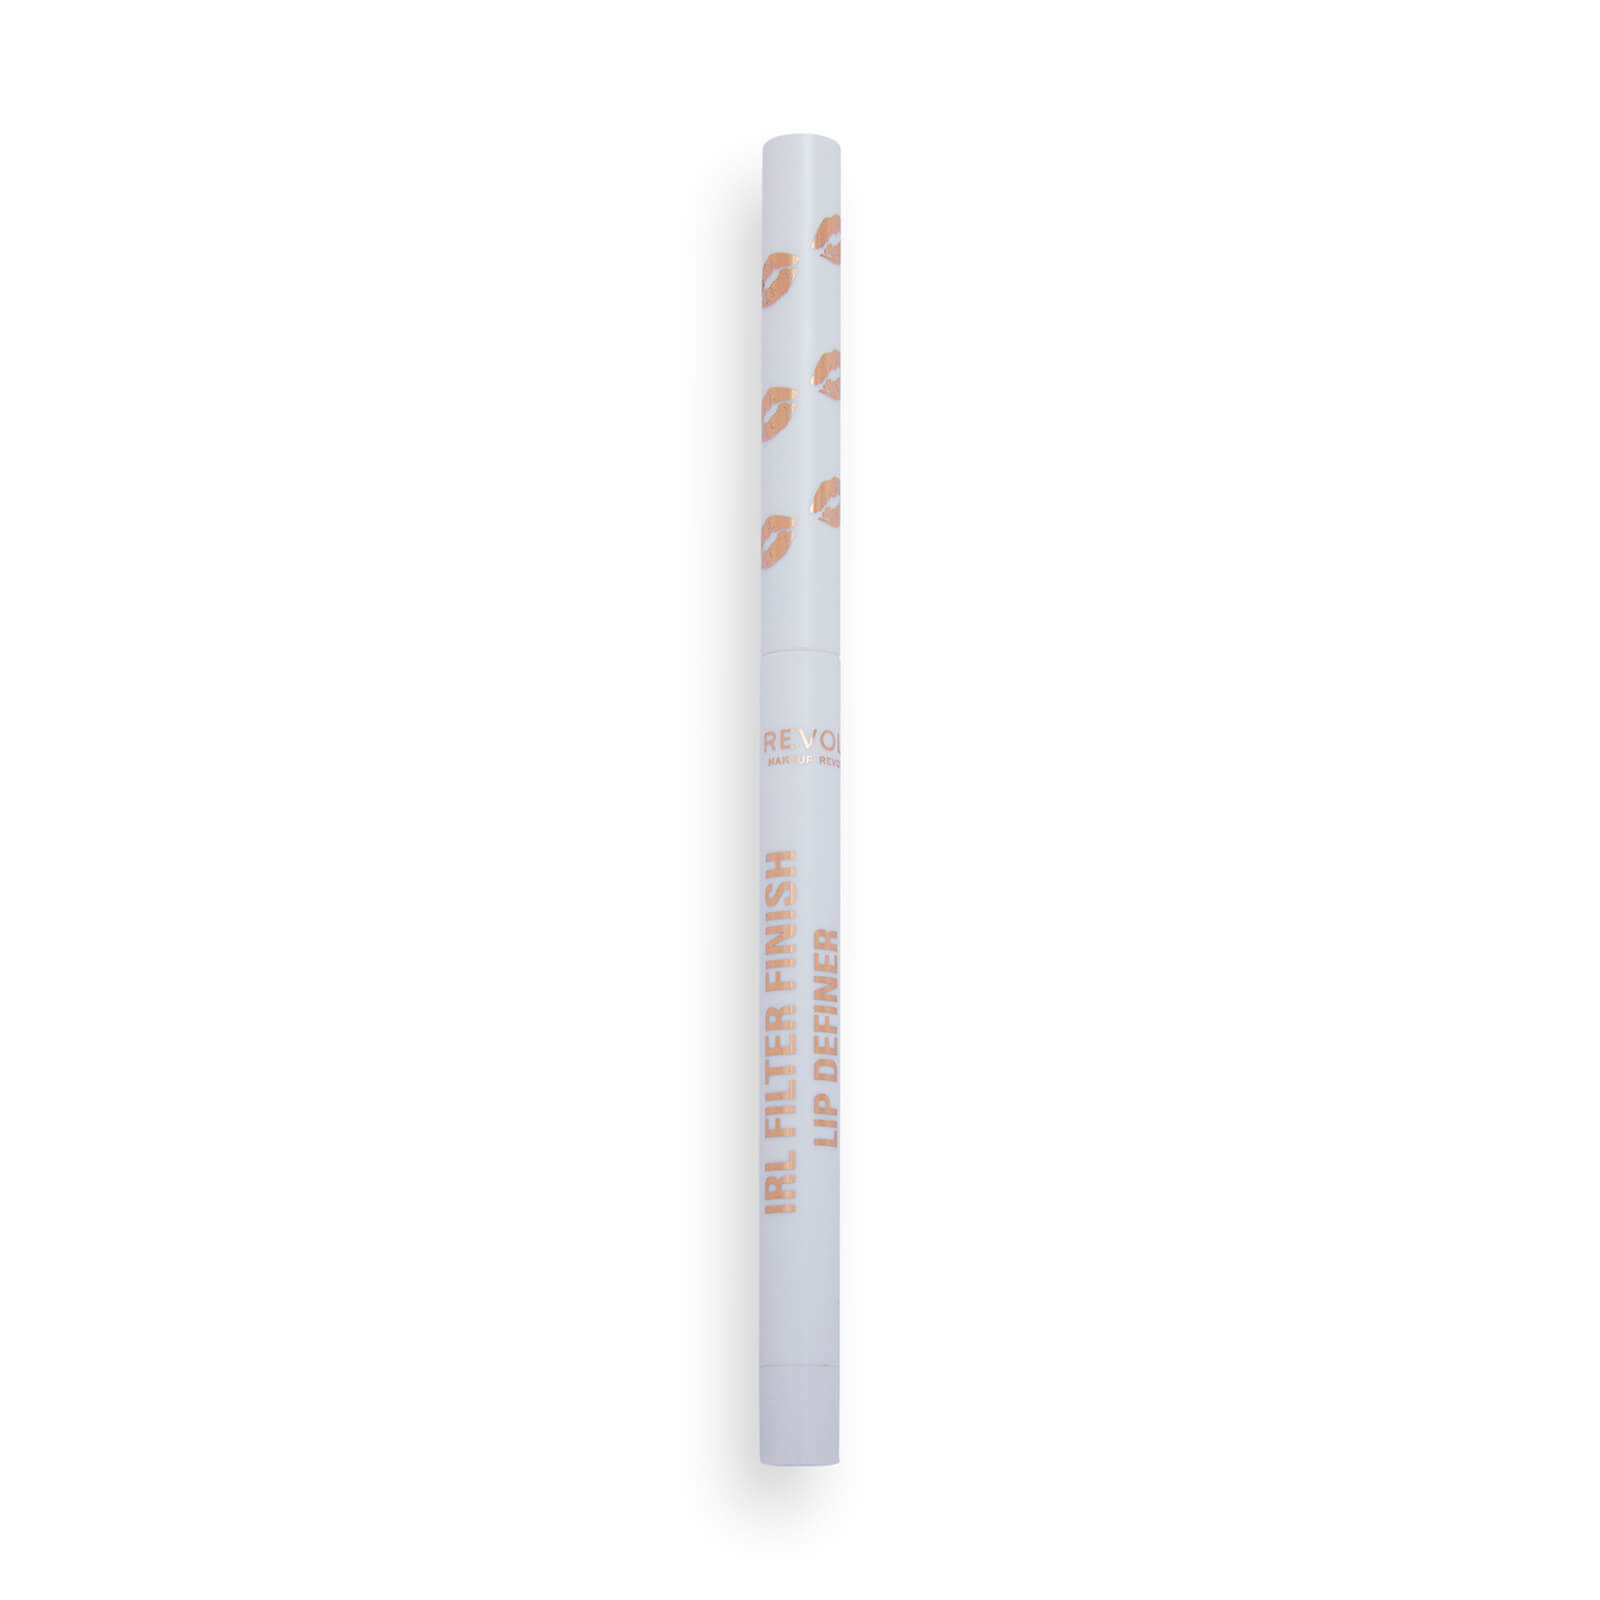 Makeup Revolution IRL Filter Finish Lip Definer 0.18g (Various Shades) - Clear Cup